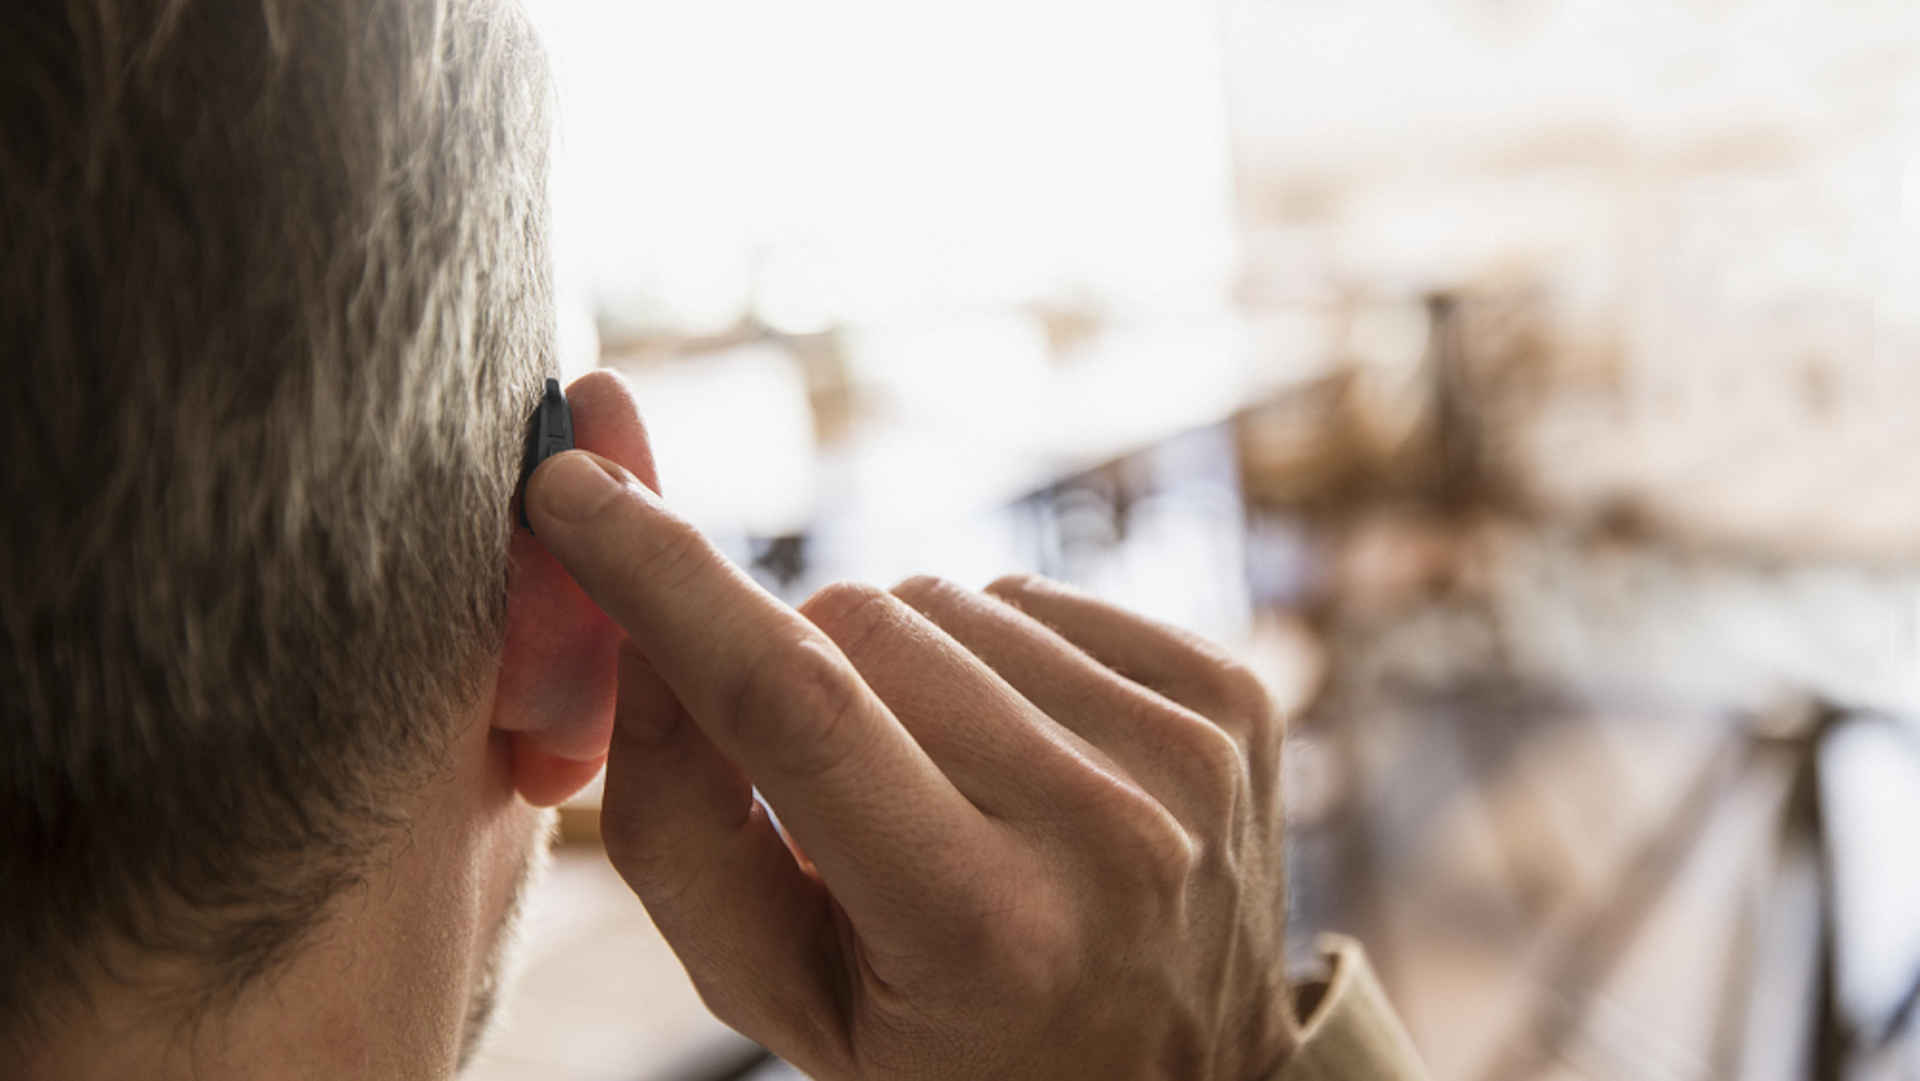 Man with hearing aids - view from behind